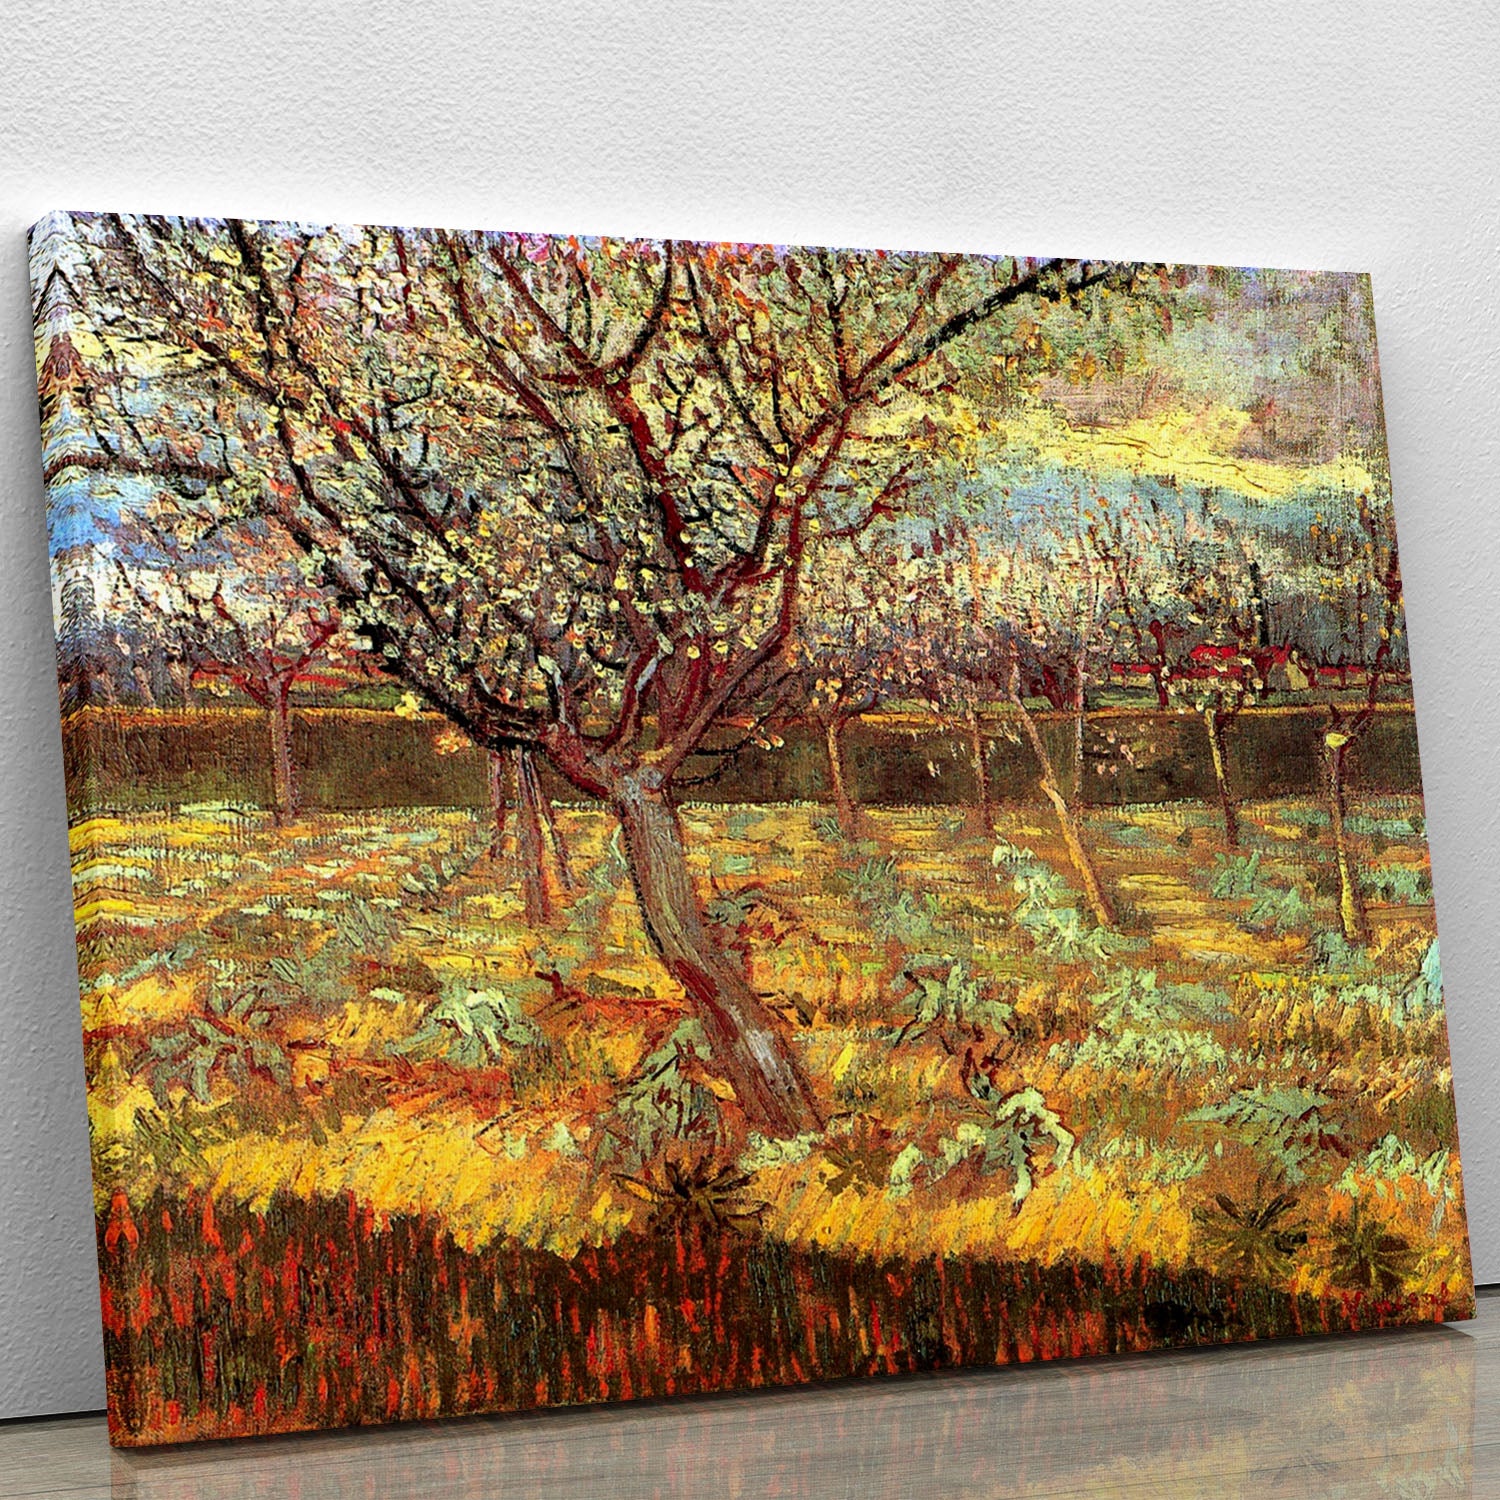 Apricot Trees in Blossom by Van Gogh Canvas Print or Poster - Canvas Art Rocks - 1